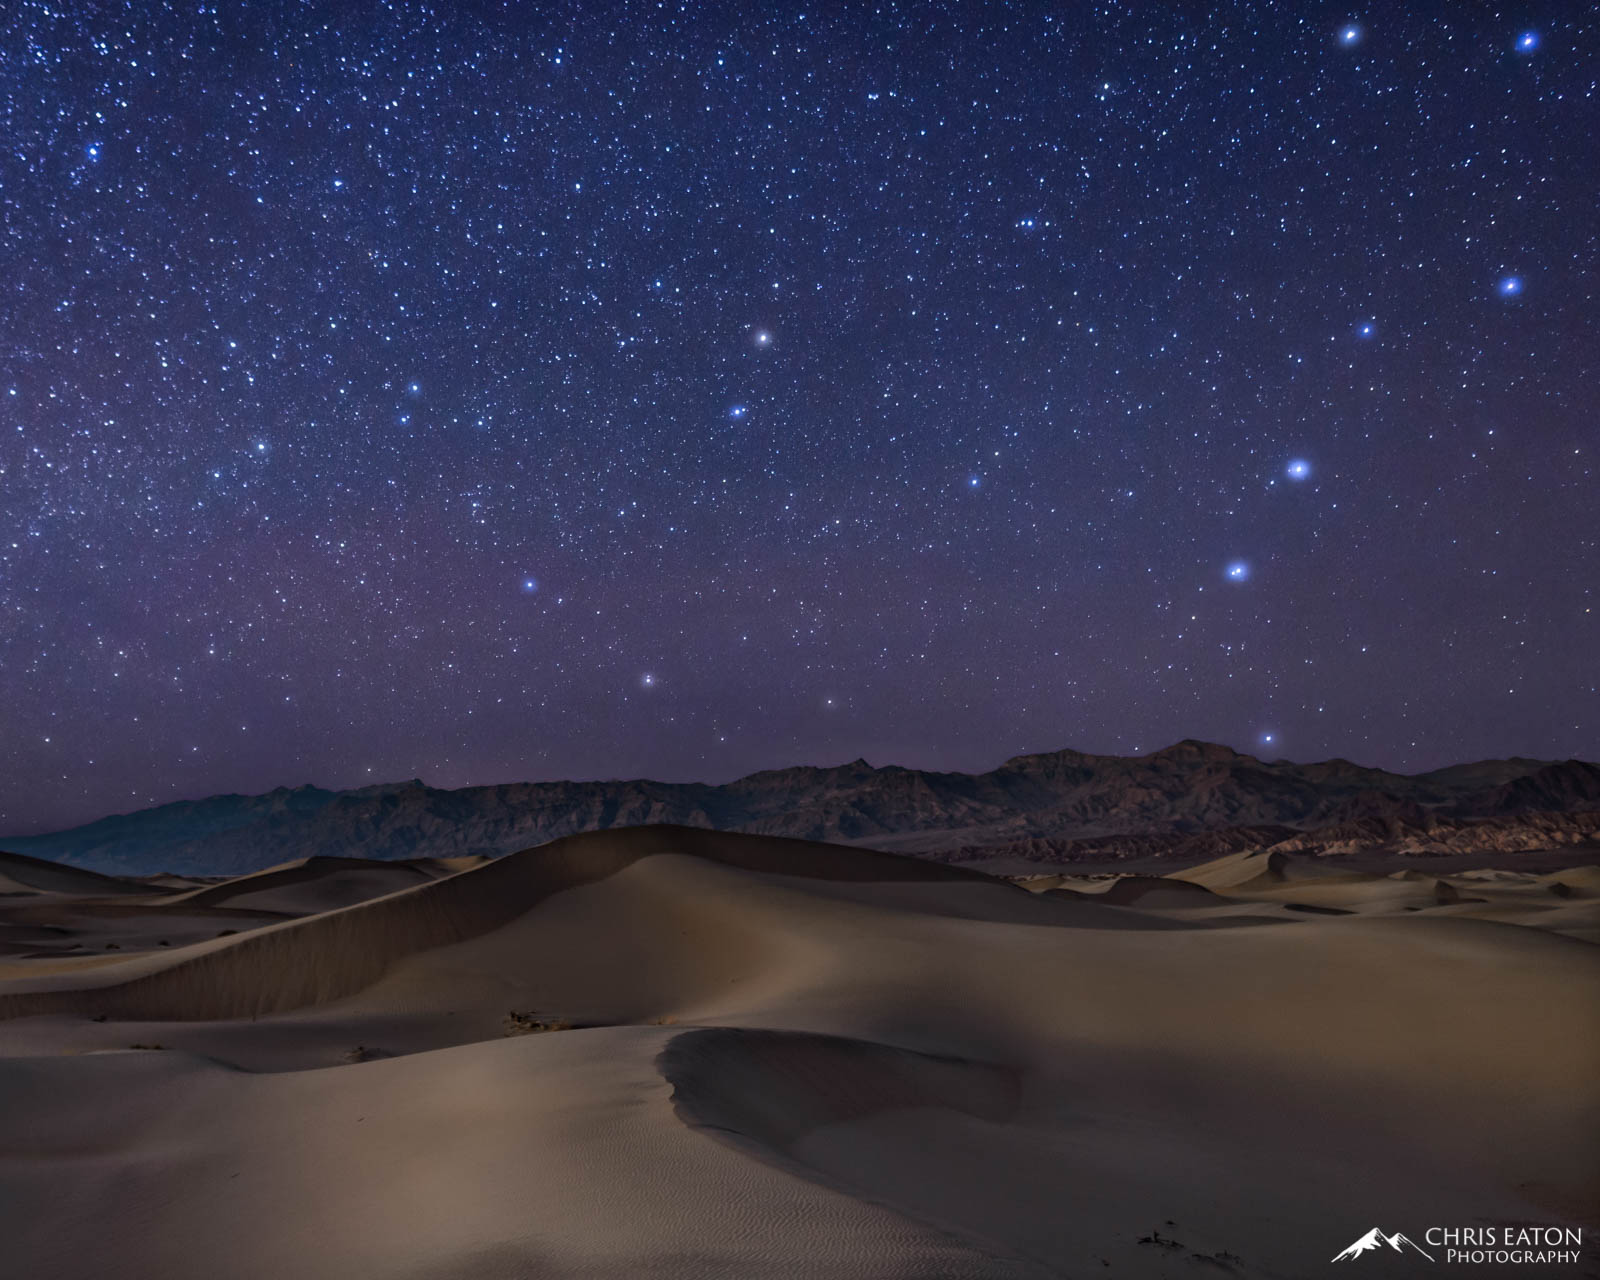 Big Dipper rising over Mesquite Flat Sand Dunes in Death Valley. National Park.